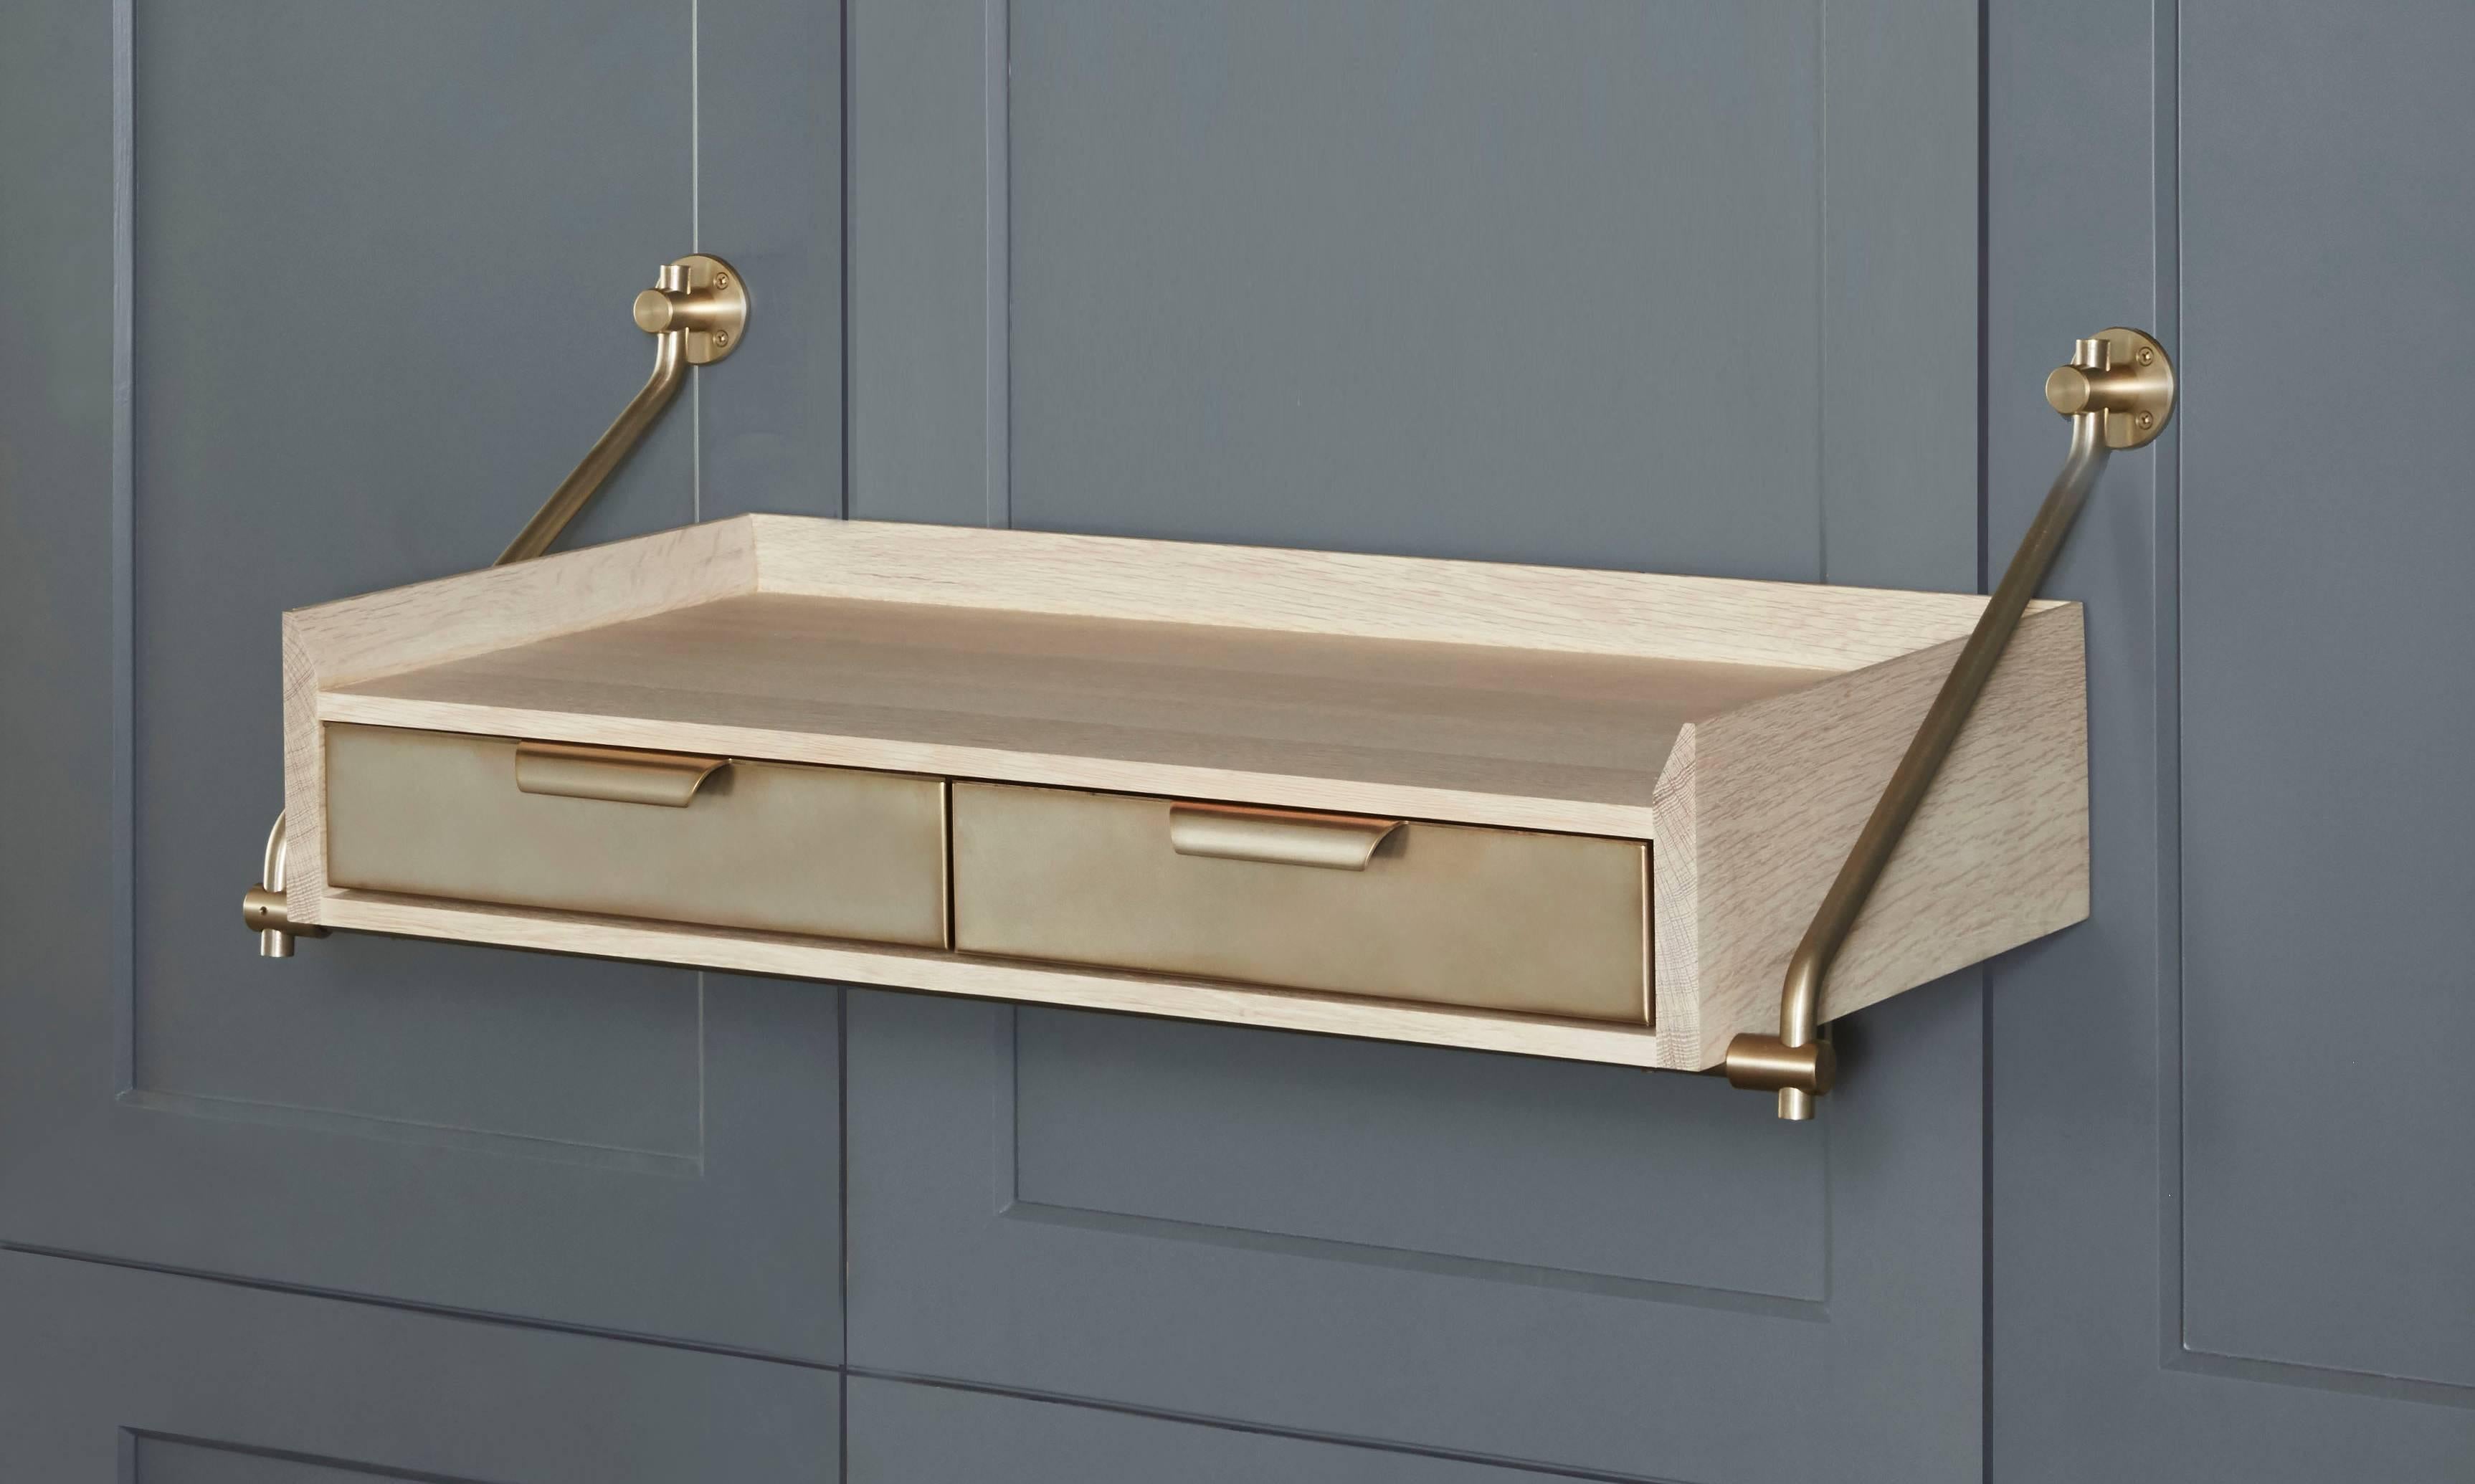 Amuneal’s wall hanging bleached oak console table uses our traditional Collector’s Shelving hardware to support this two-drawer unit with raised knife-edge surround. The scale of the unit and its unique floating design make it a great entry table,